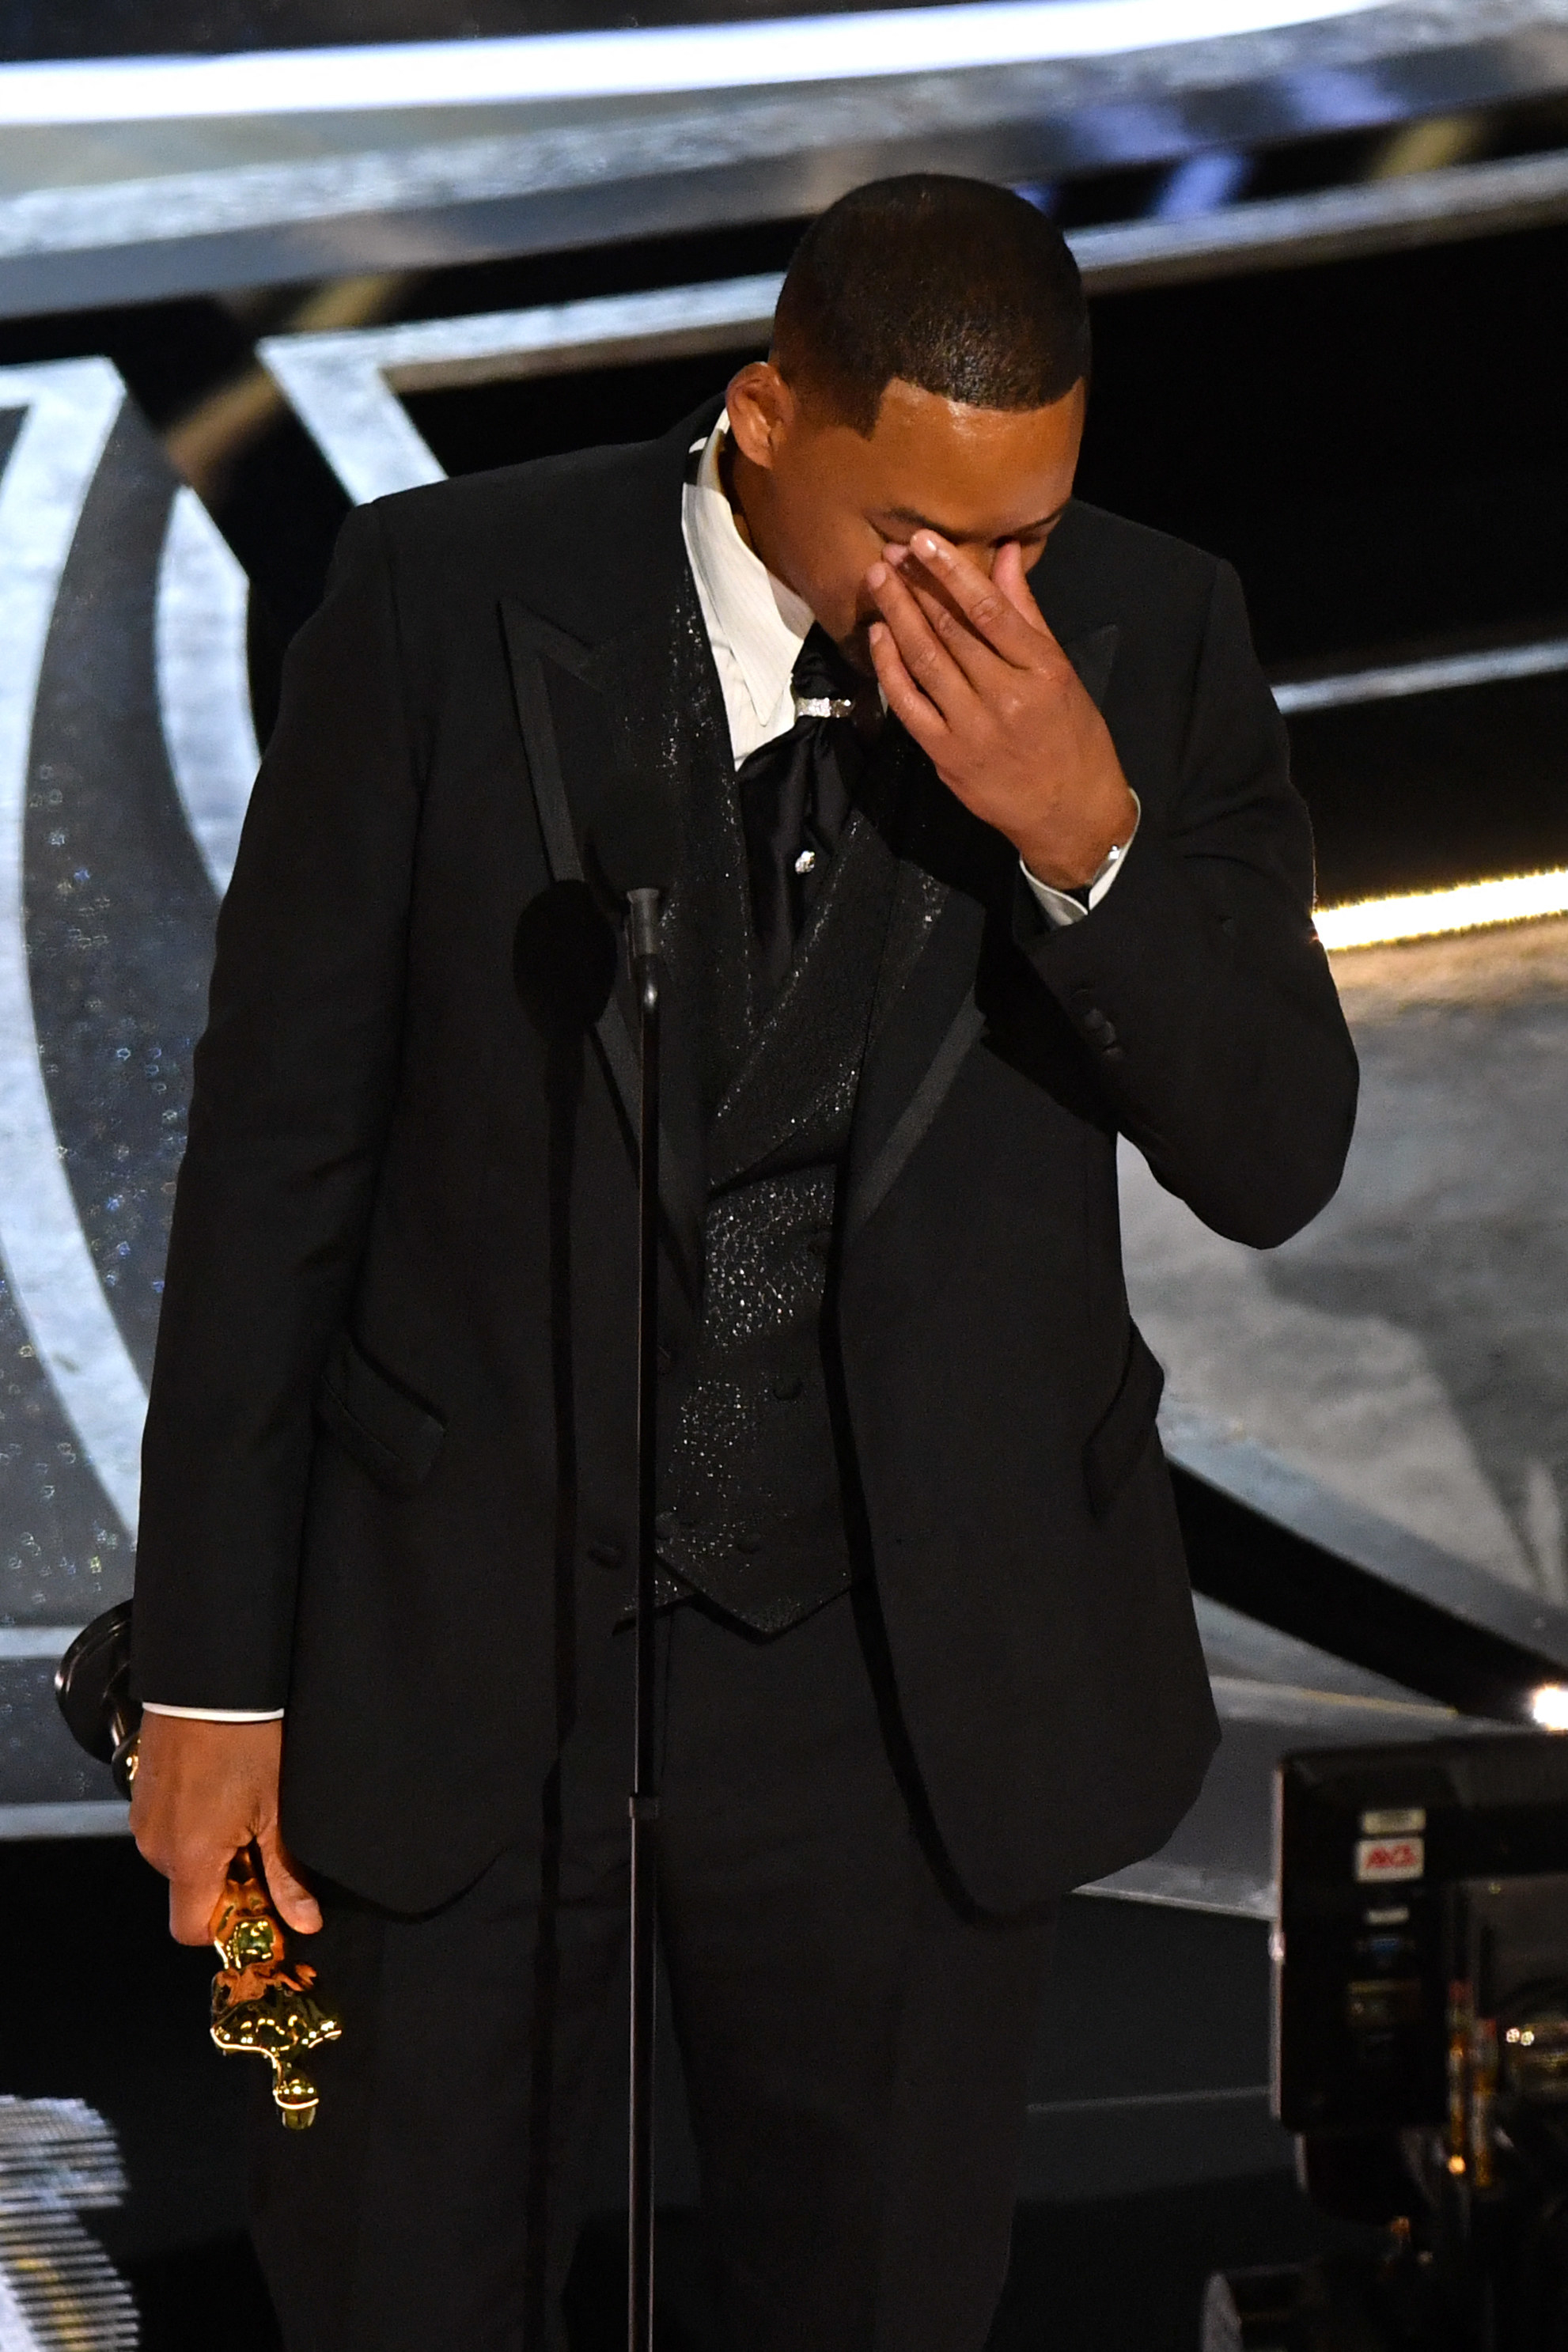 Will onstage covering his face with his hand and holding his Oscar during his acceptance speech